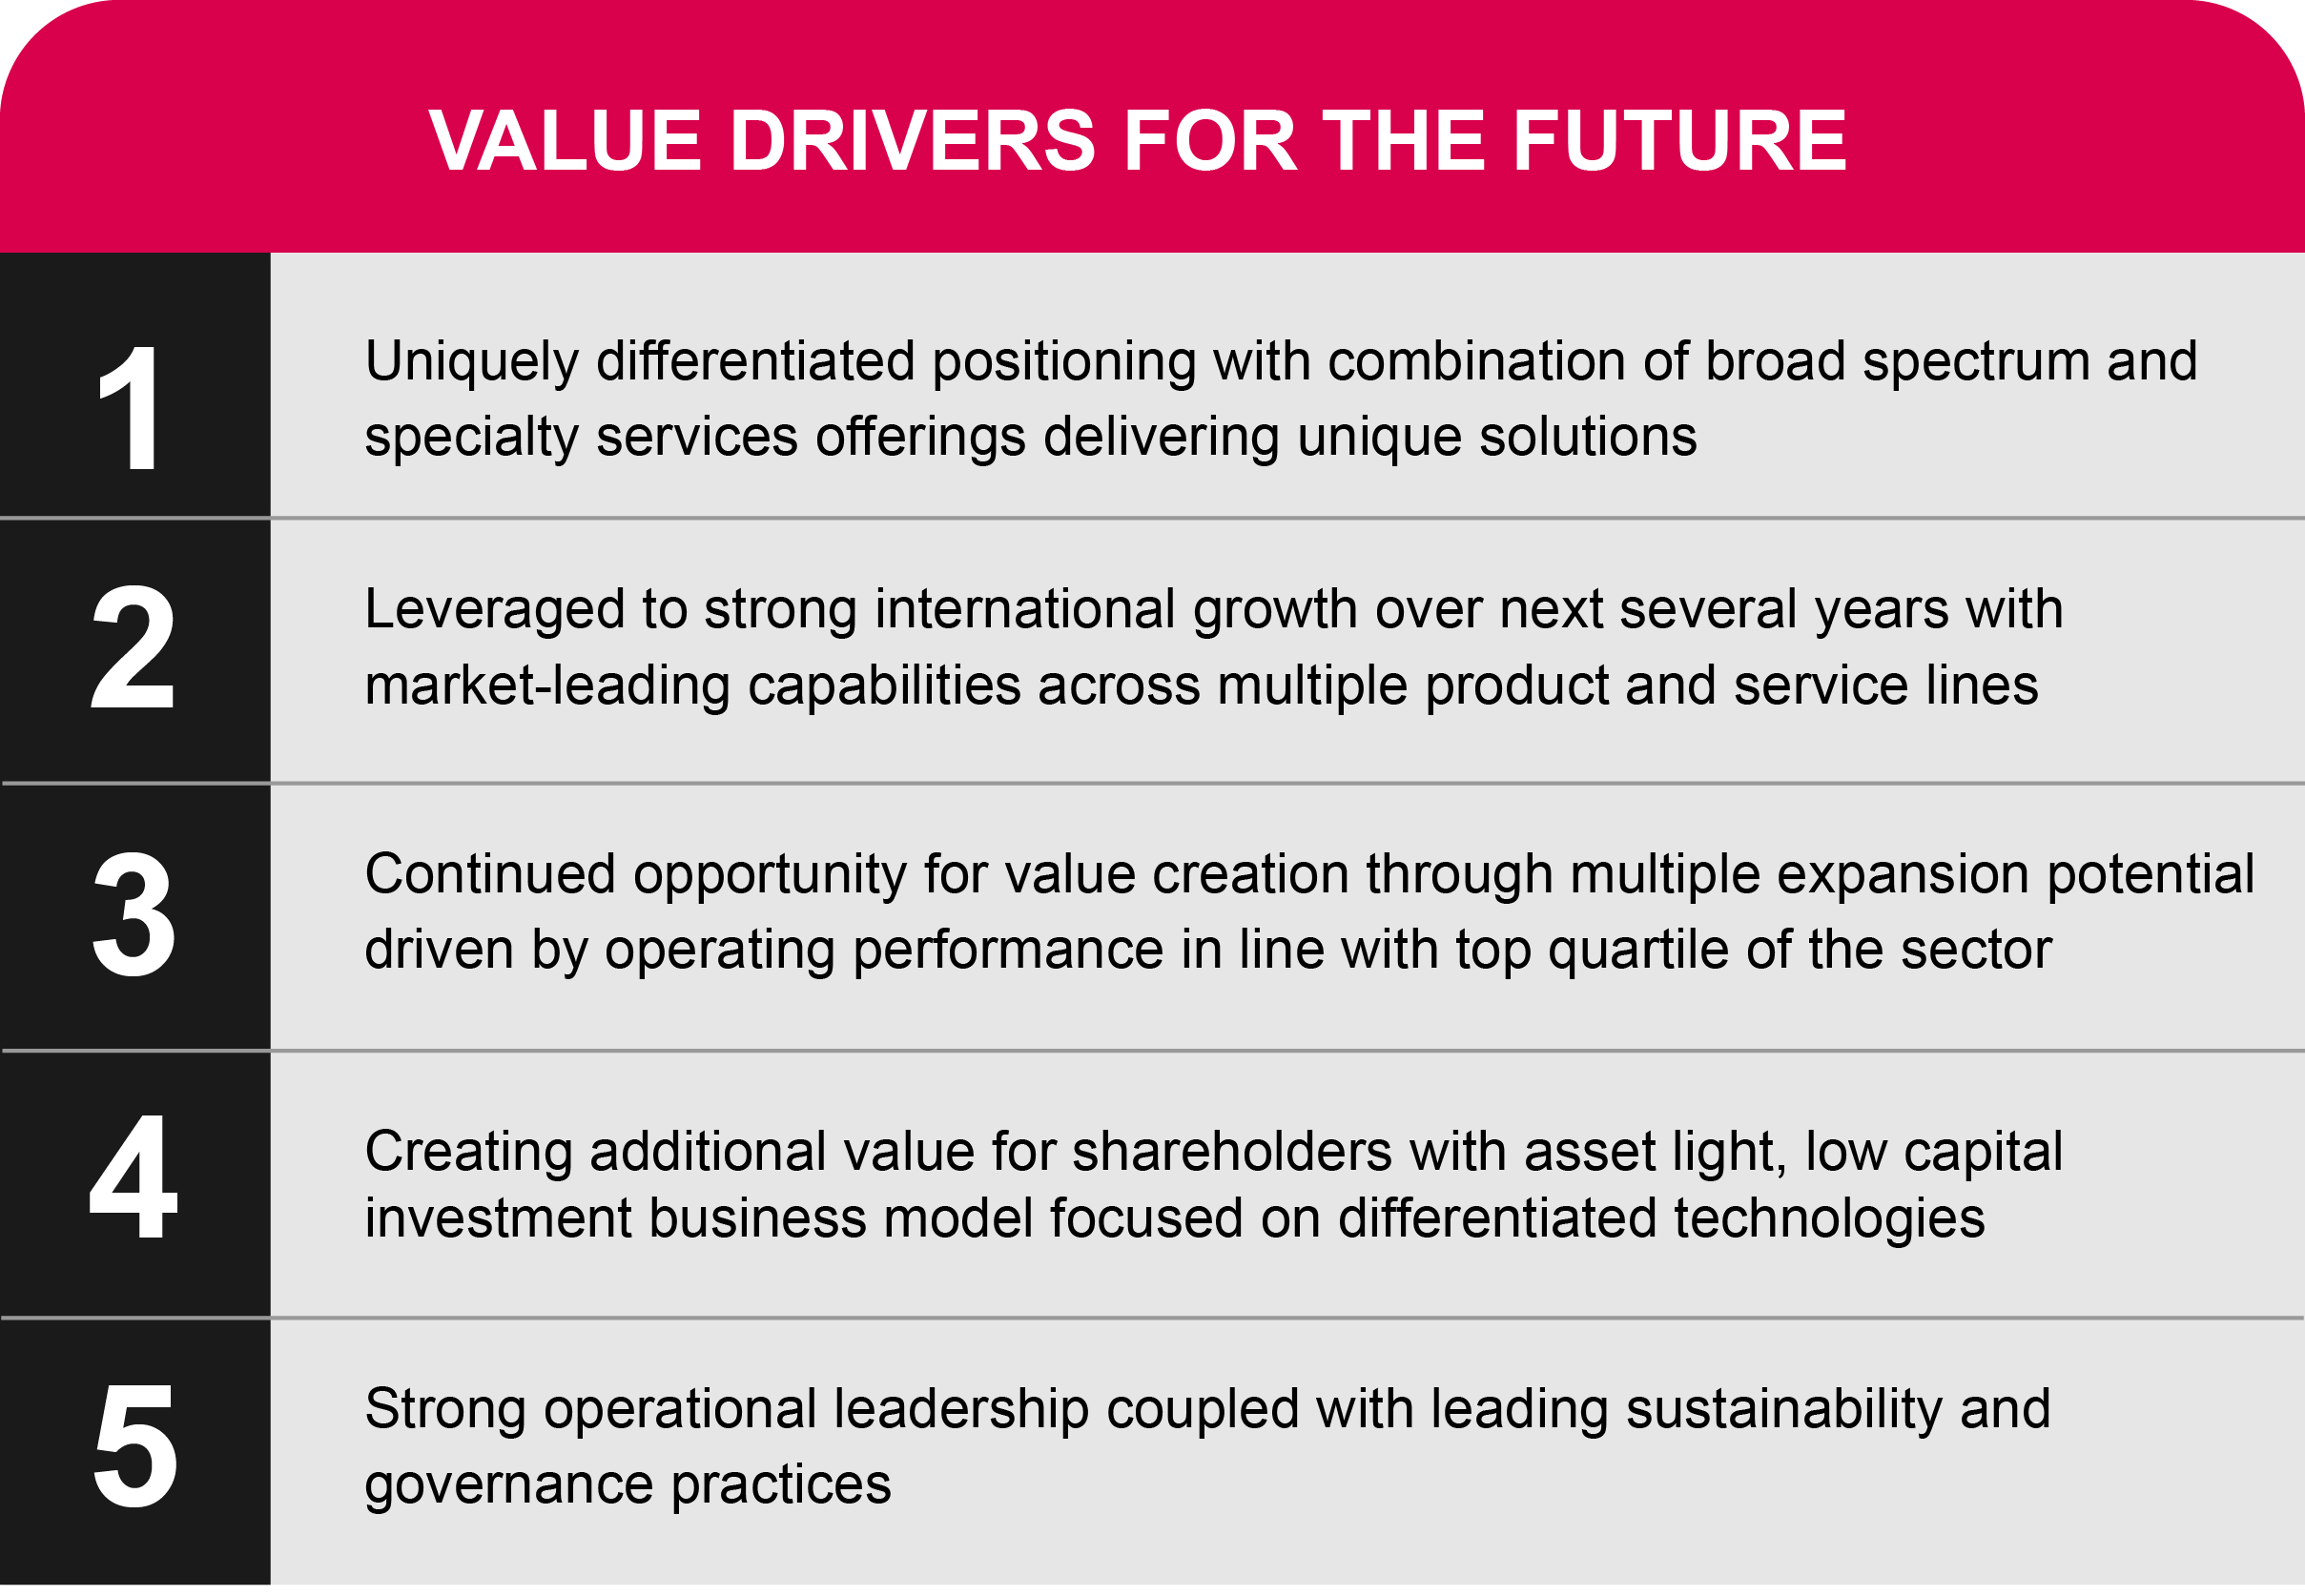 Value Drivers For the Future_Proxy24.jpg